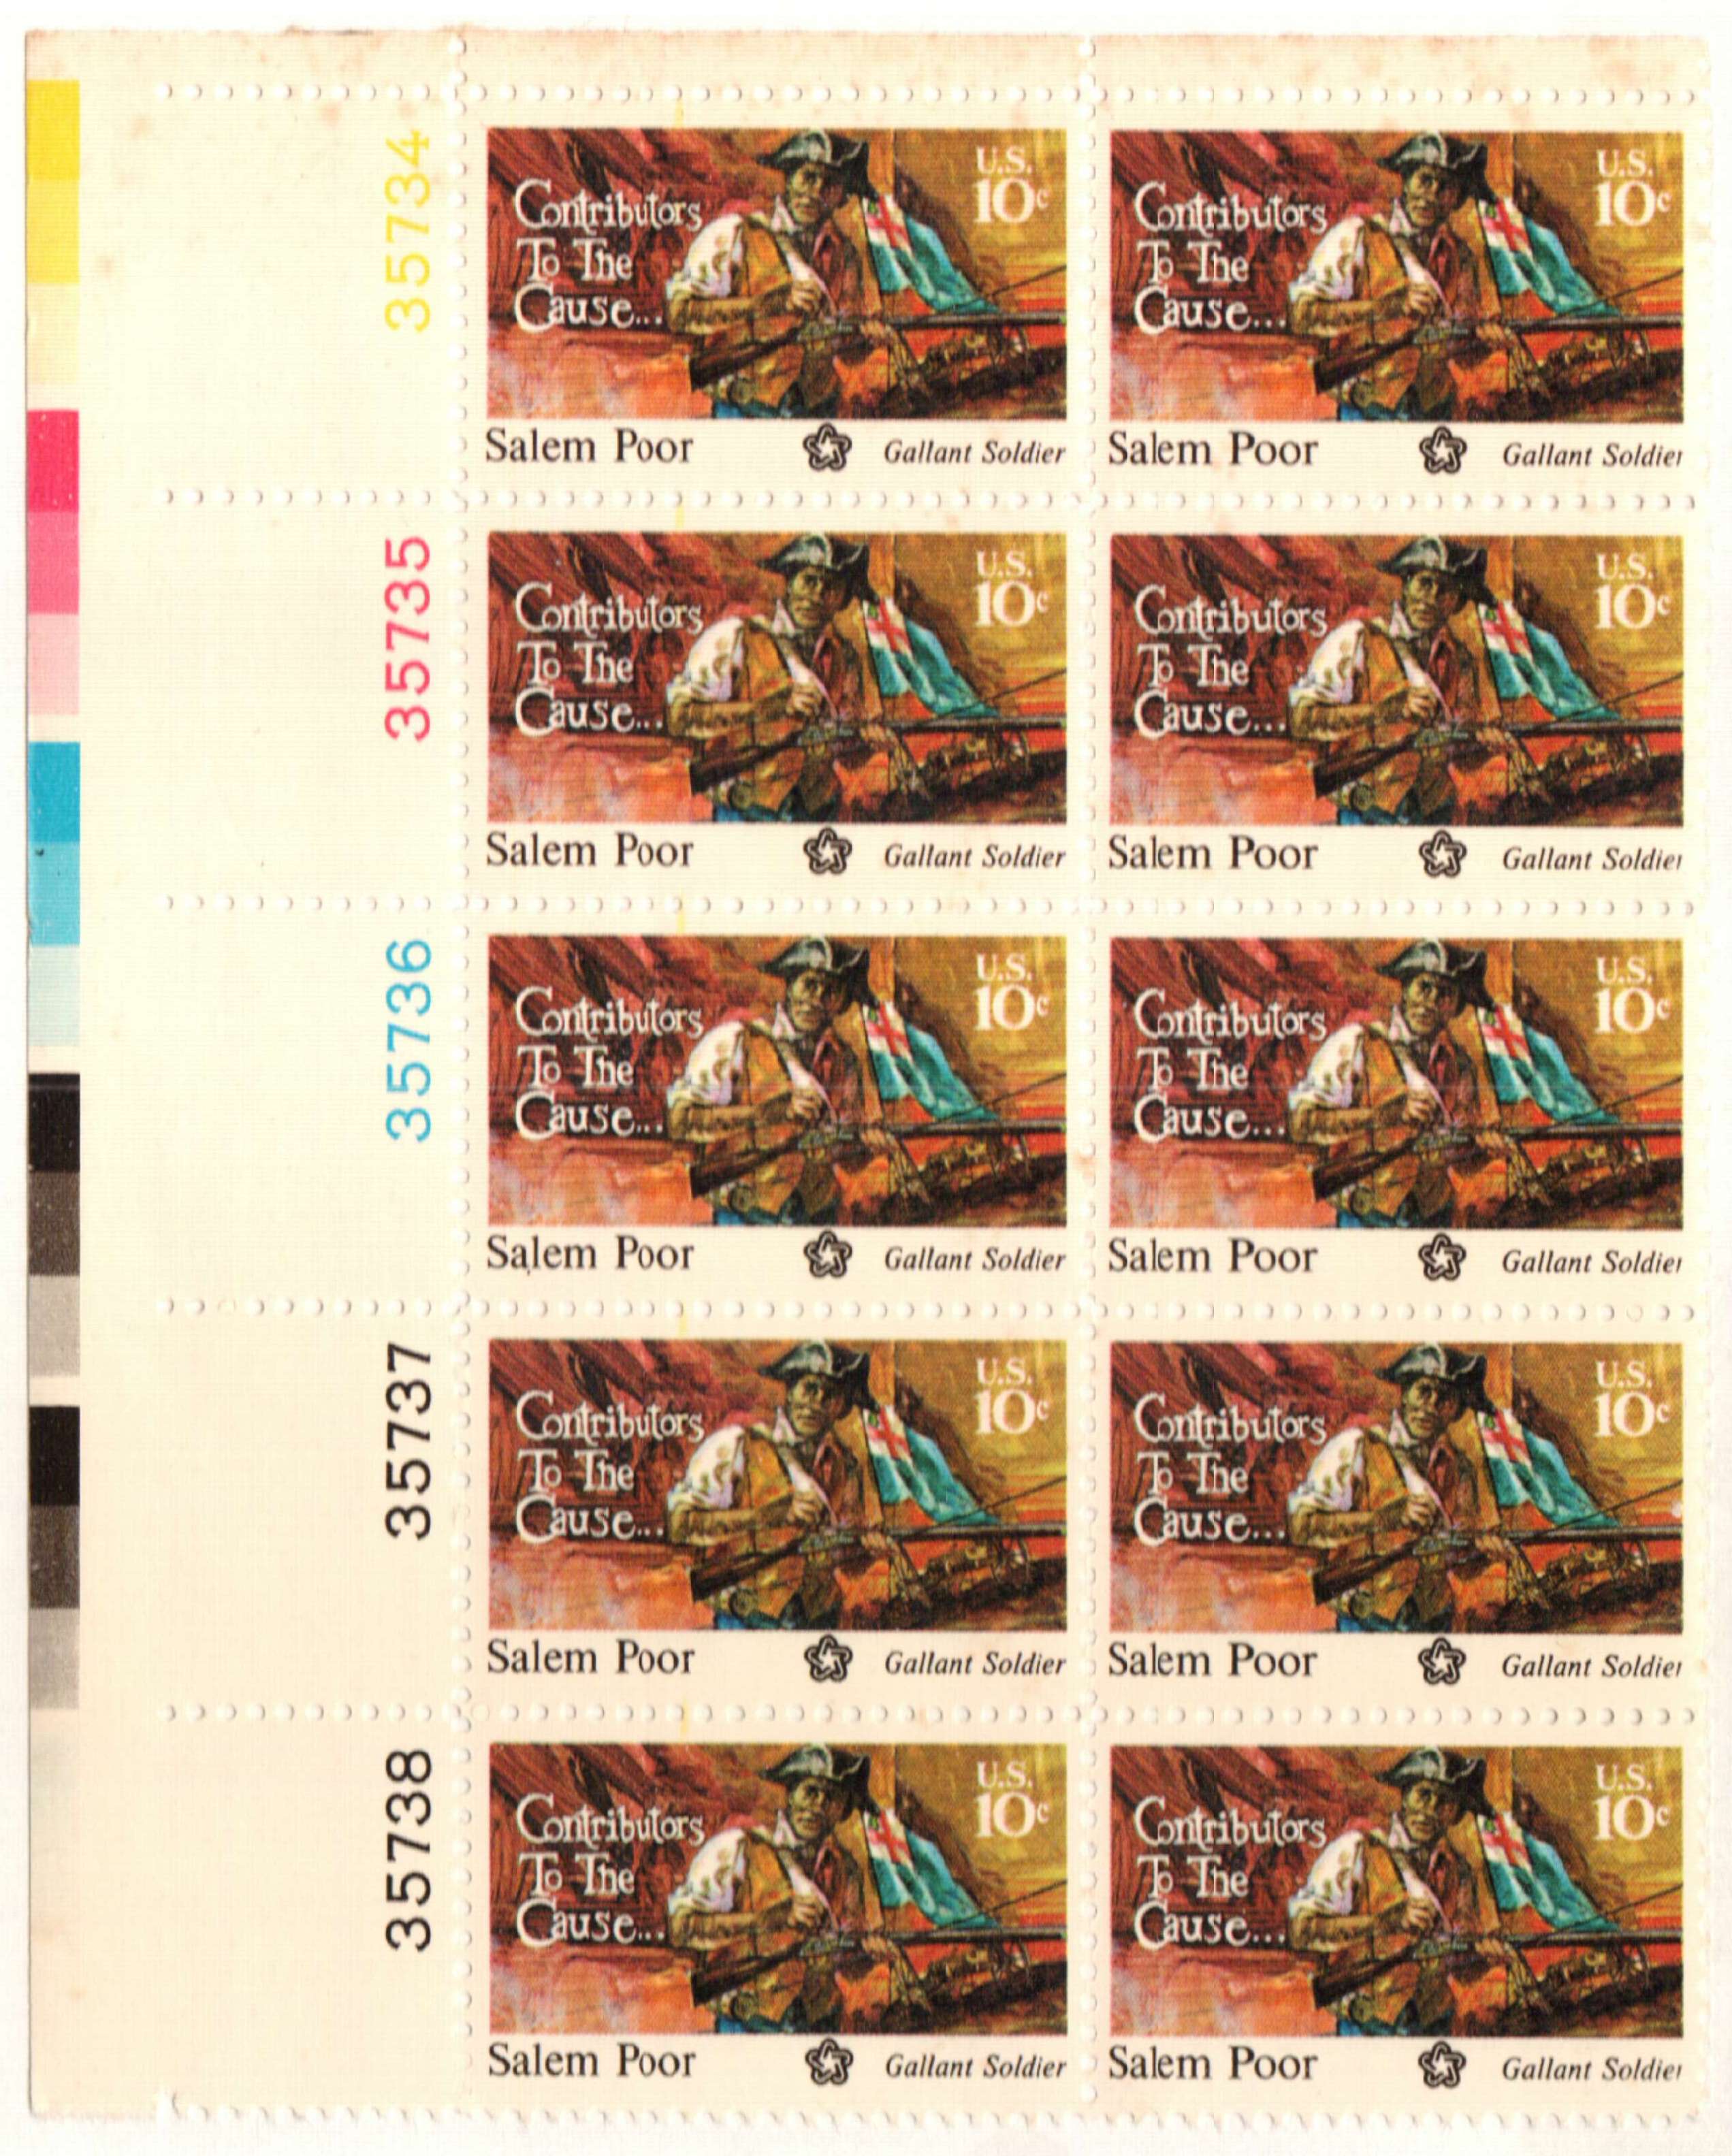 USA Global International Forever Stamps Pane of 10 – FallenCollector